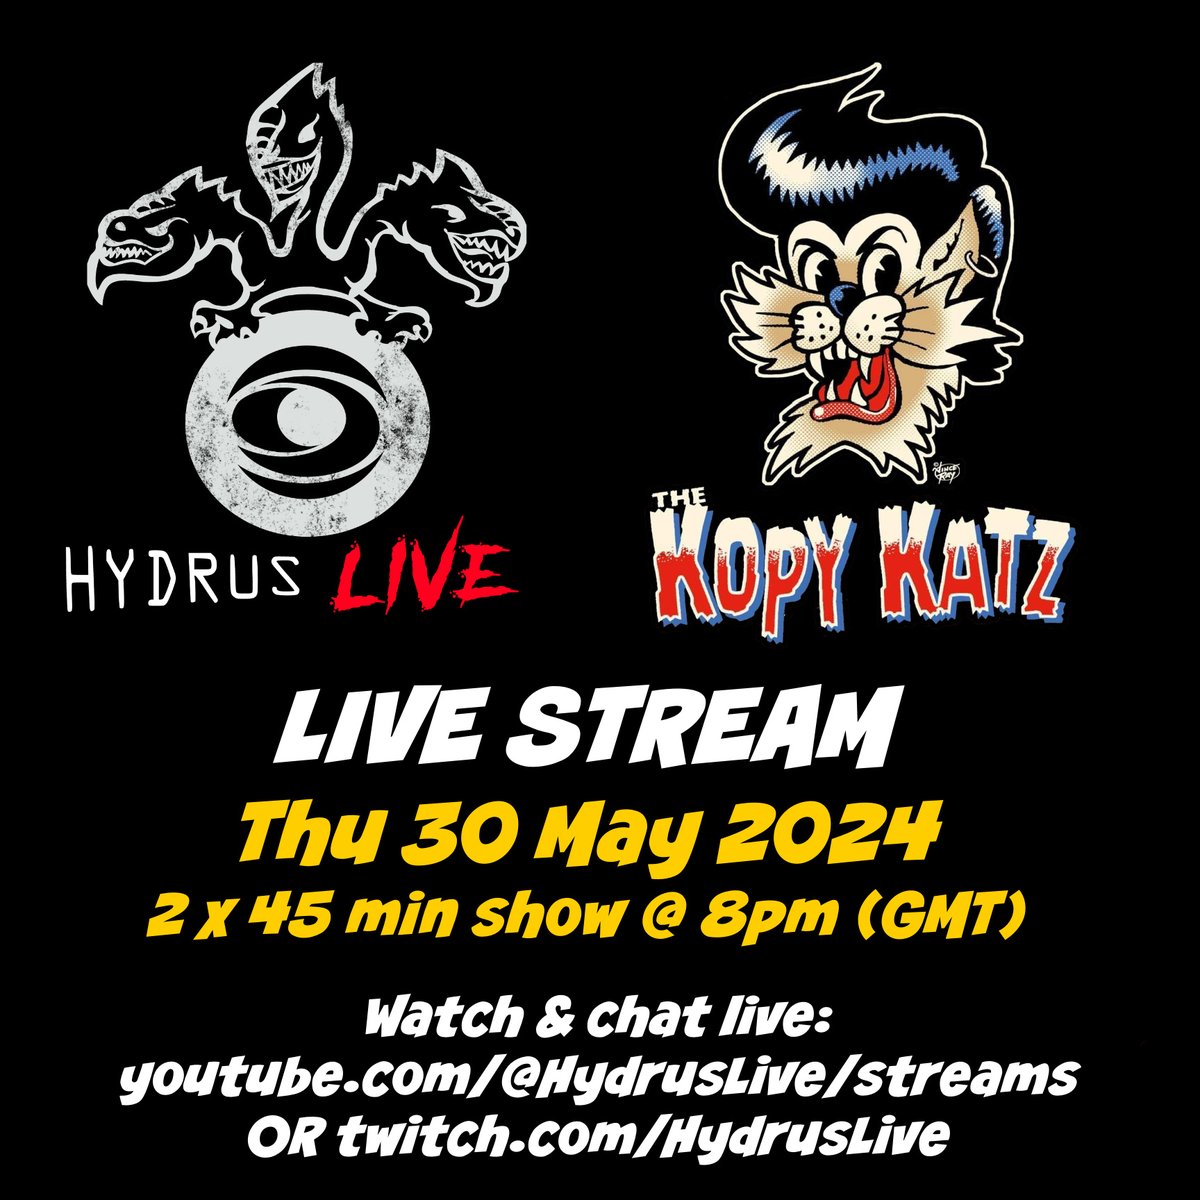 💥 Tomorrow night, Hydrus Live are live streaming a full gig by The Kopy Katz at 8pm (GMT). Tune in and chat (OK, heckle) as we go. Watch on links below 🎵🎶💥 #rockabilly #thestraycats #rocknroll

WATCH HERE:
youtube.com/live/PTrYI_DN1…
twitch.com/HydrusLive